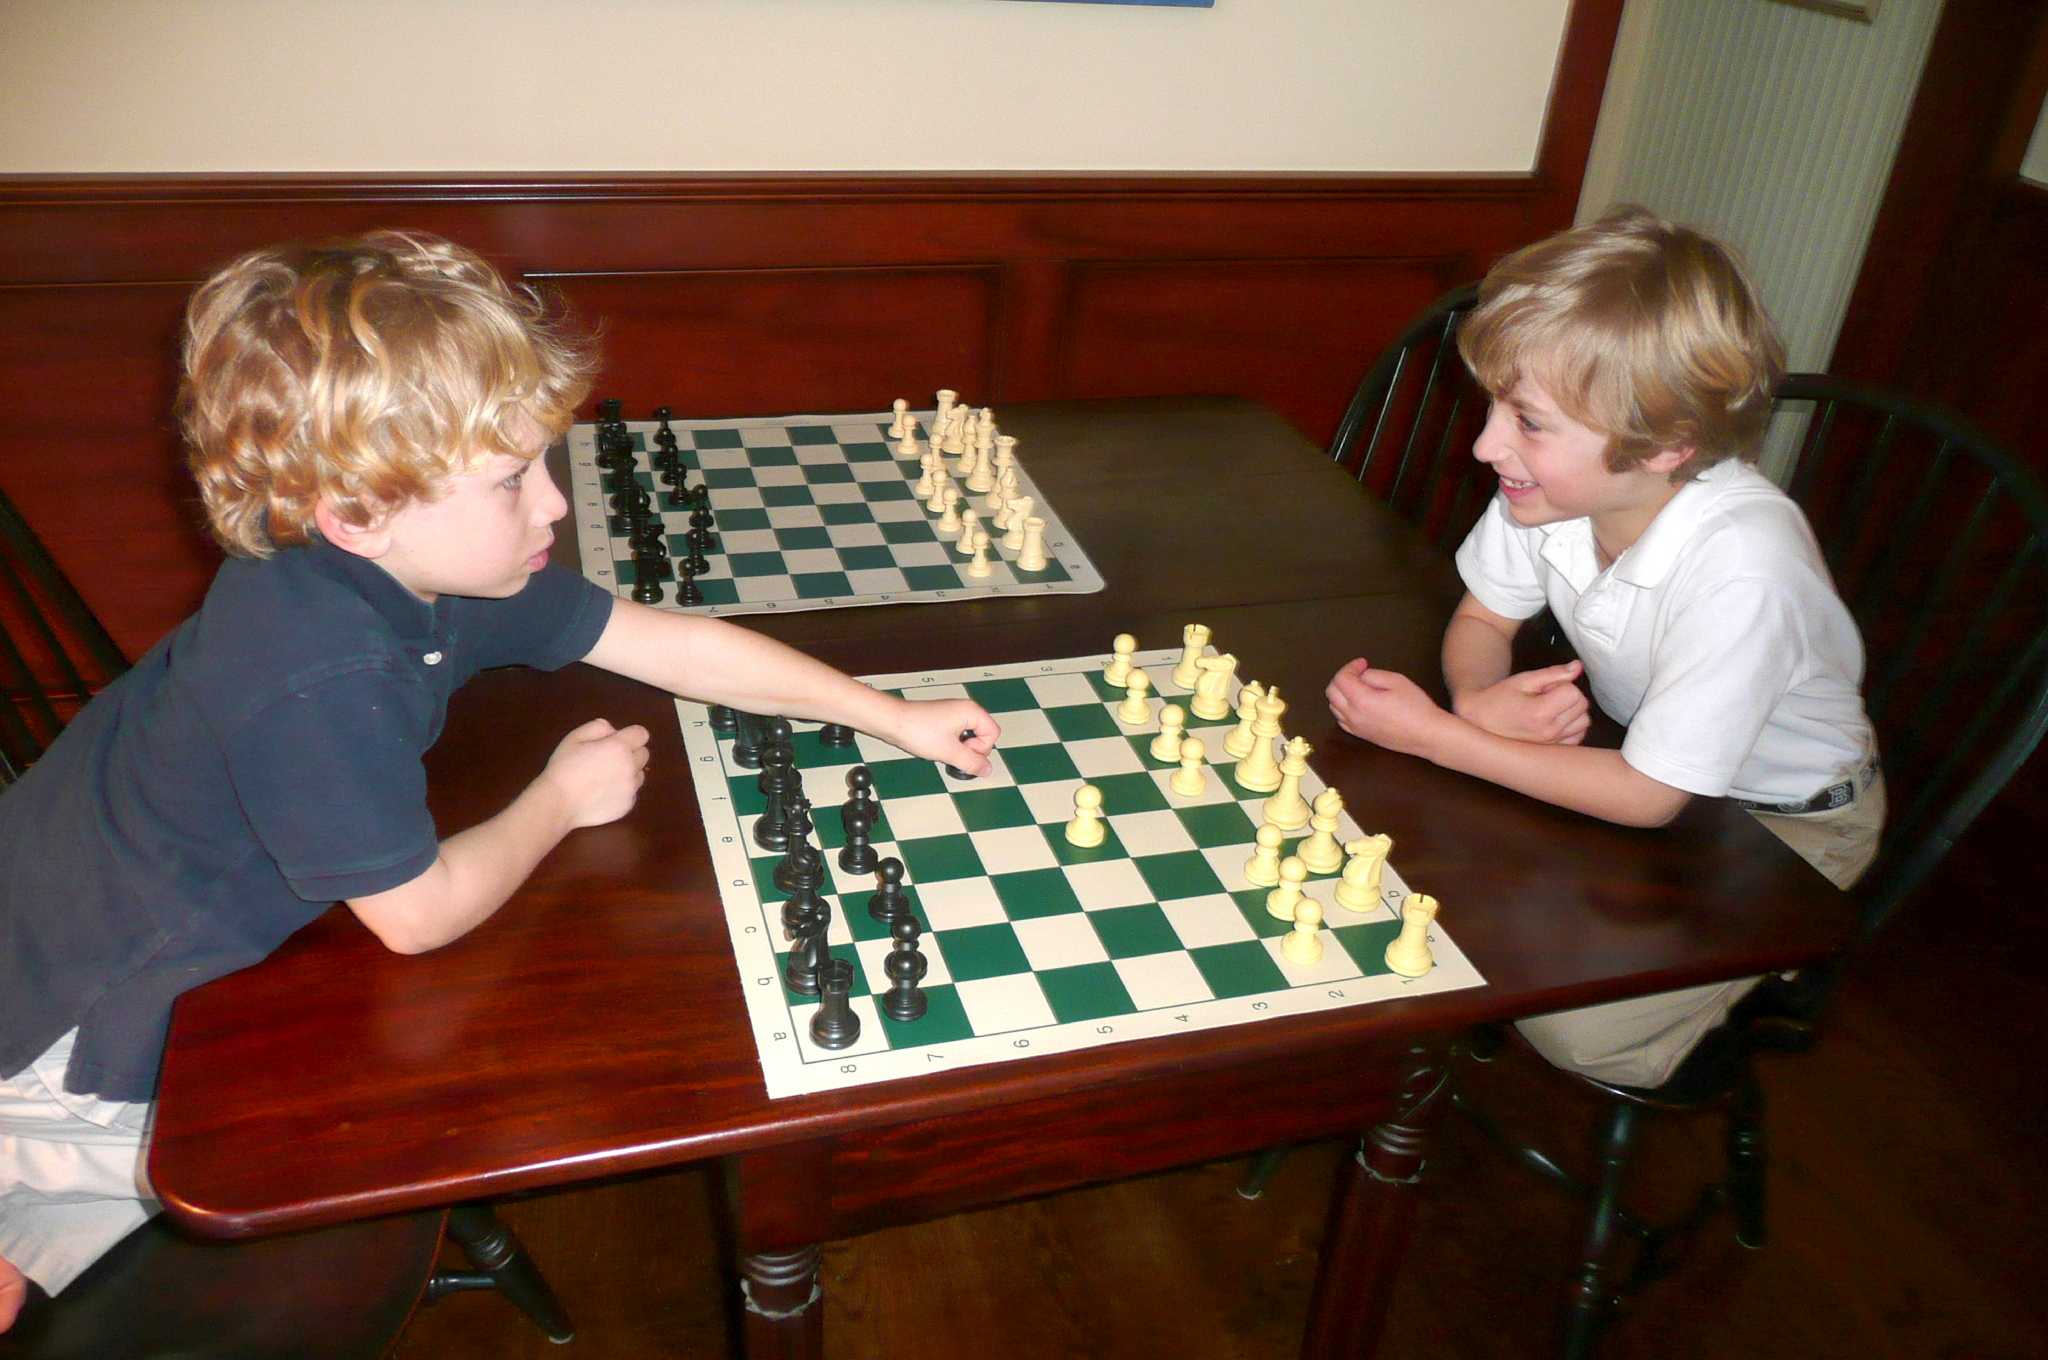 Kids playing chess. Two boys, aged six and eight years, think